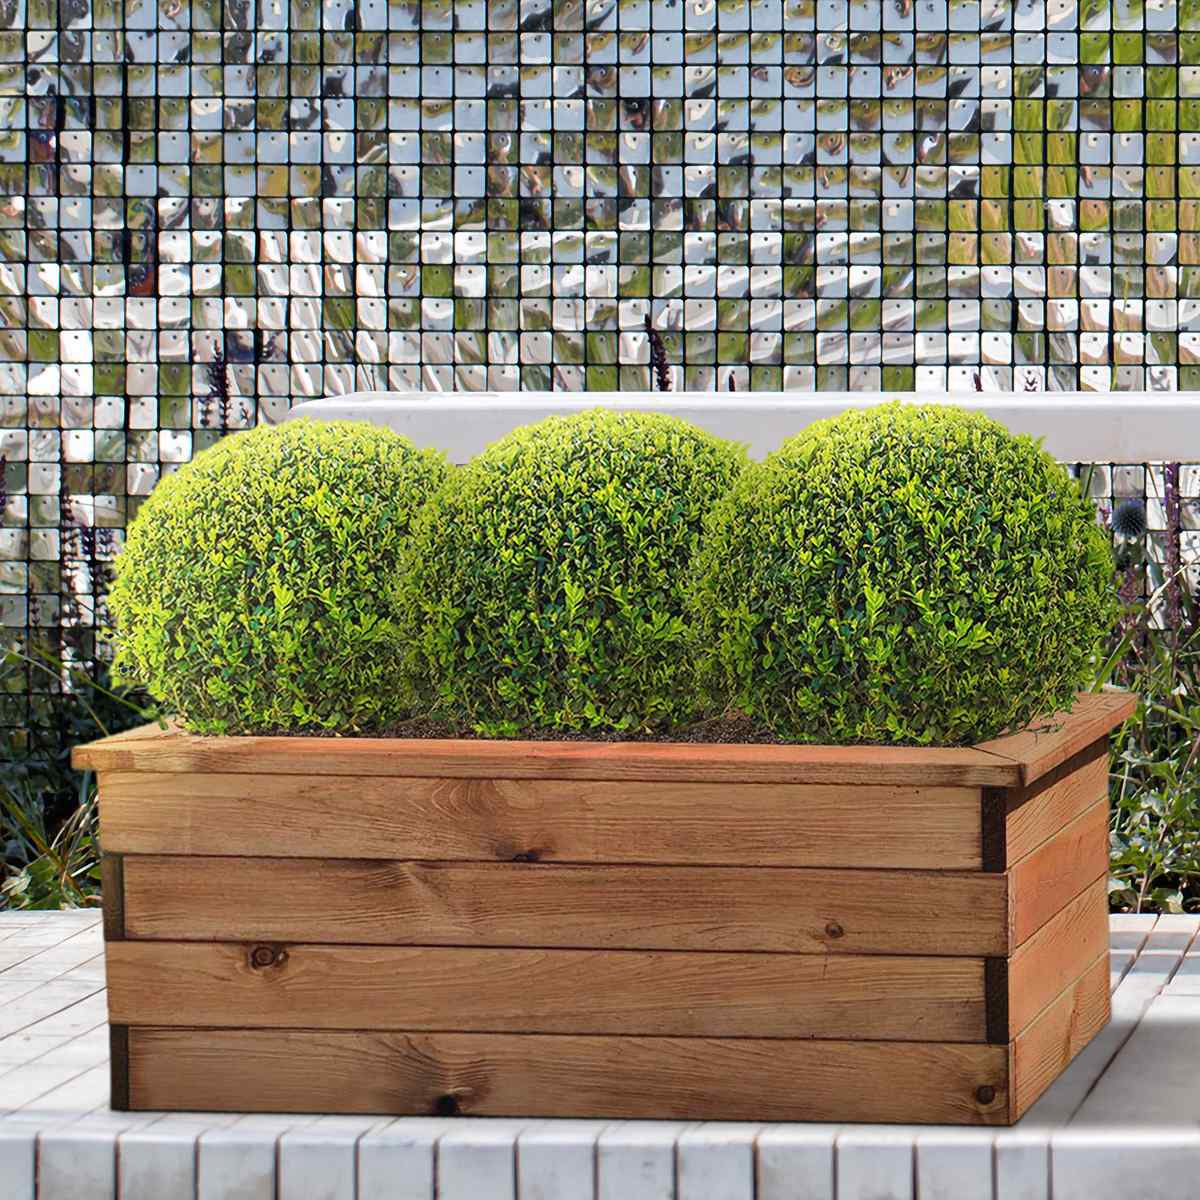 HORTICO Wood Planter Trough for Garden, Outdoor Plant Pot Rectangular Made of Redwood, L82 W41 H31.5 cm, 105.9L